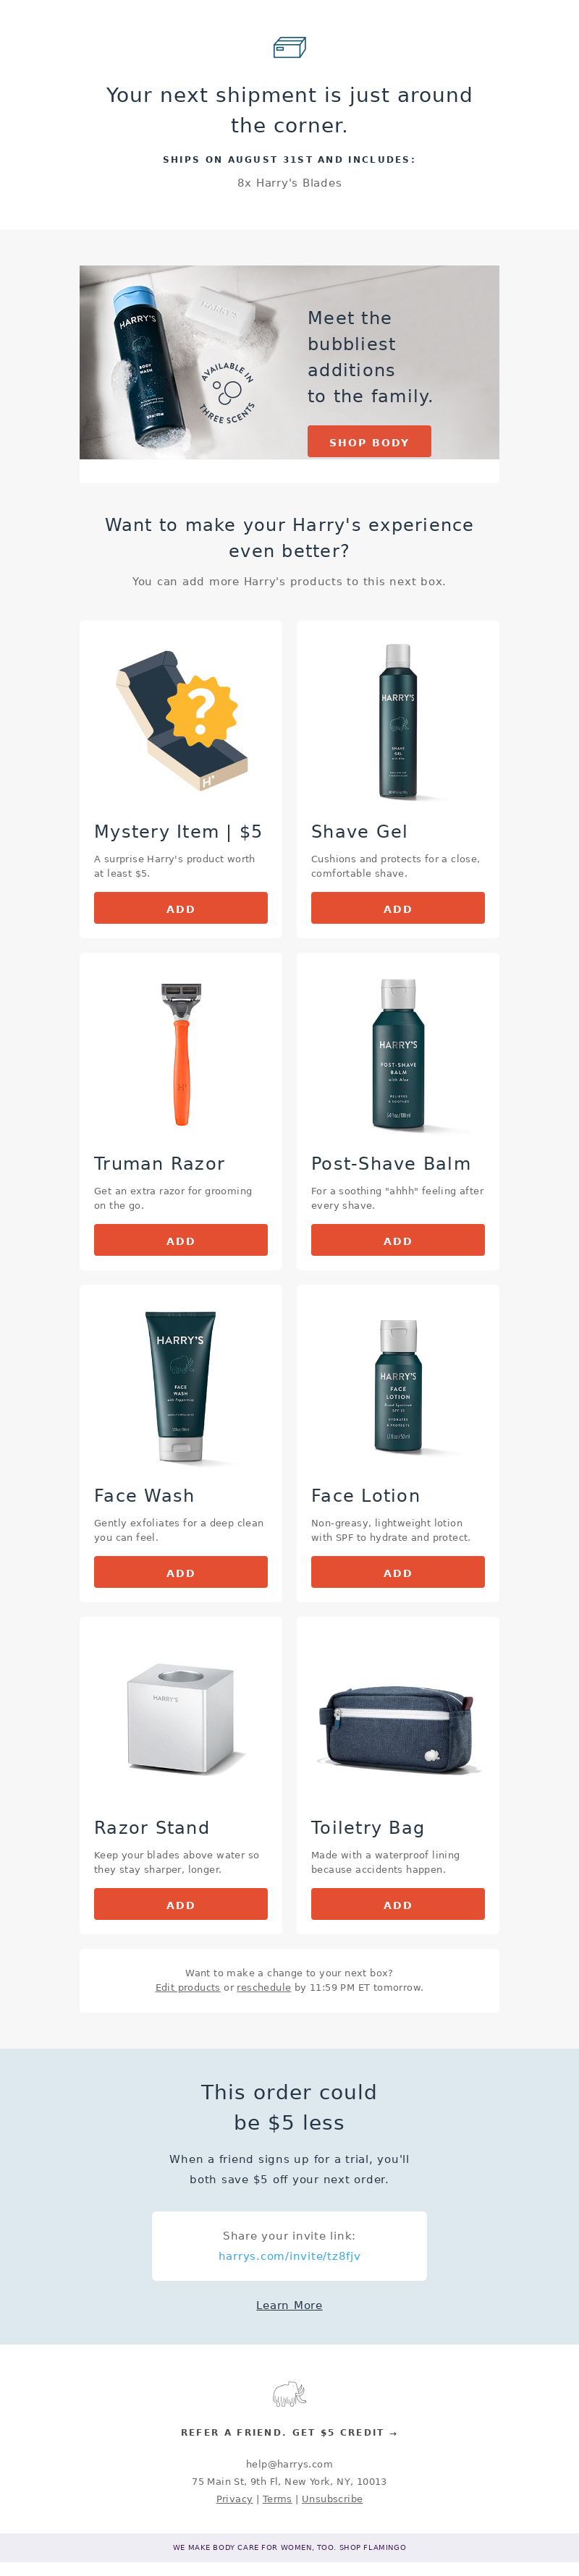 Harry's - Your Harry's Shave Plan order